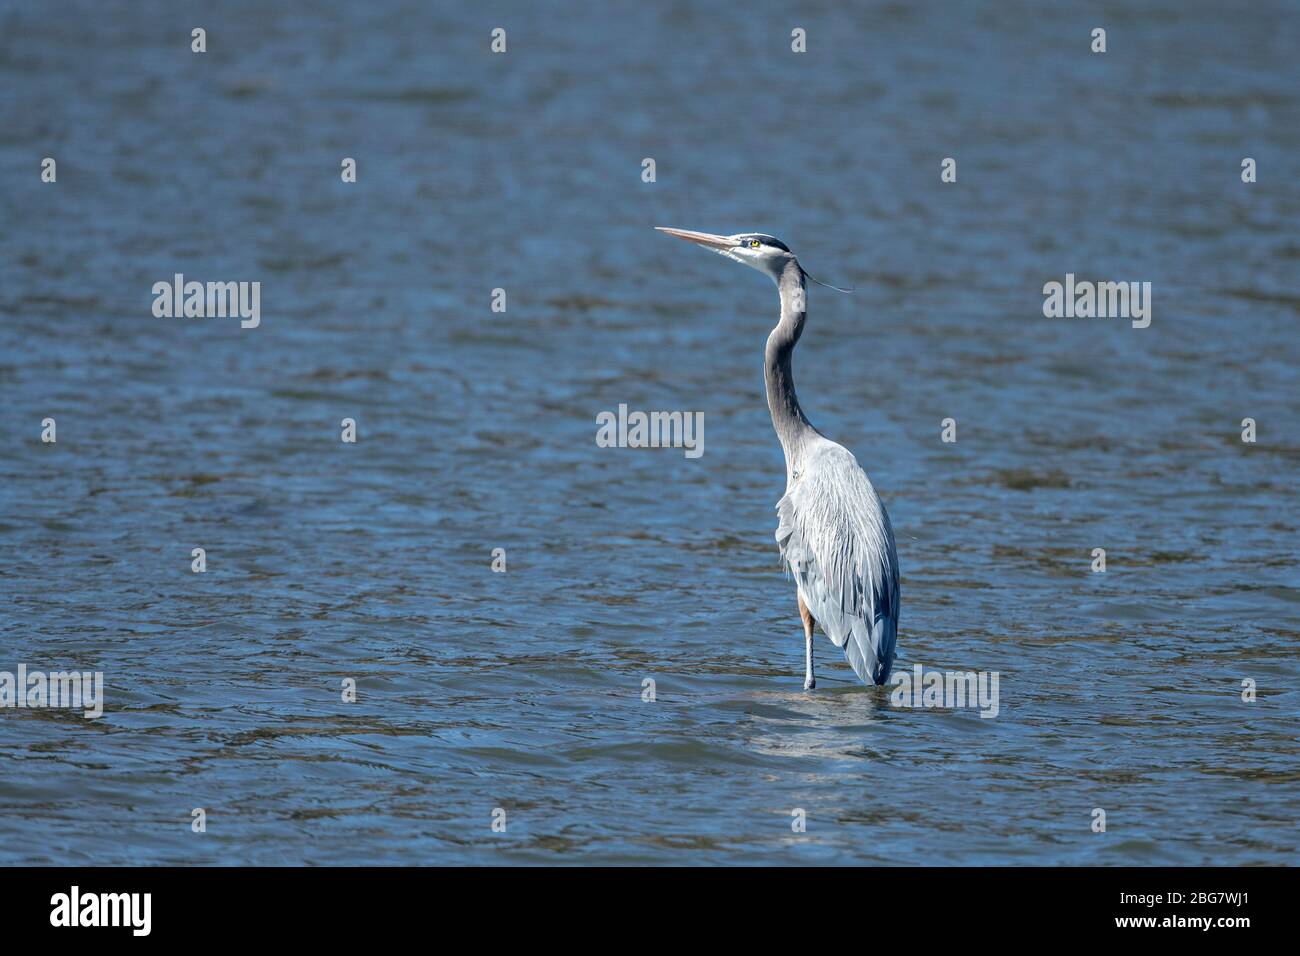 A great blue heron stands on a shallow spot in Fernan Lake in north Idaho. Stock Photo